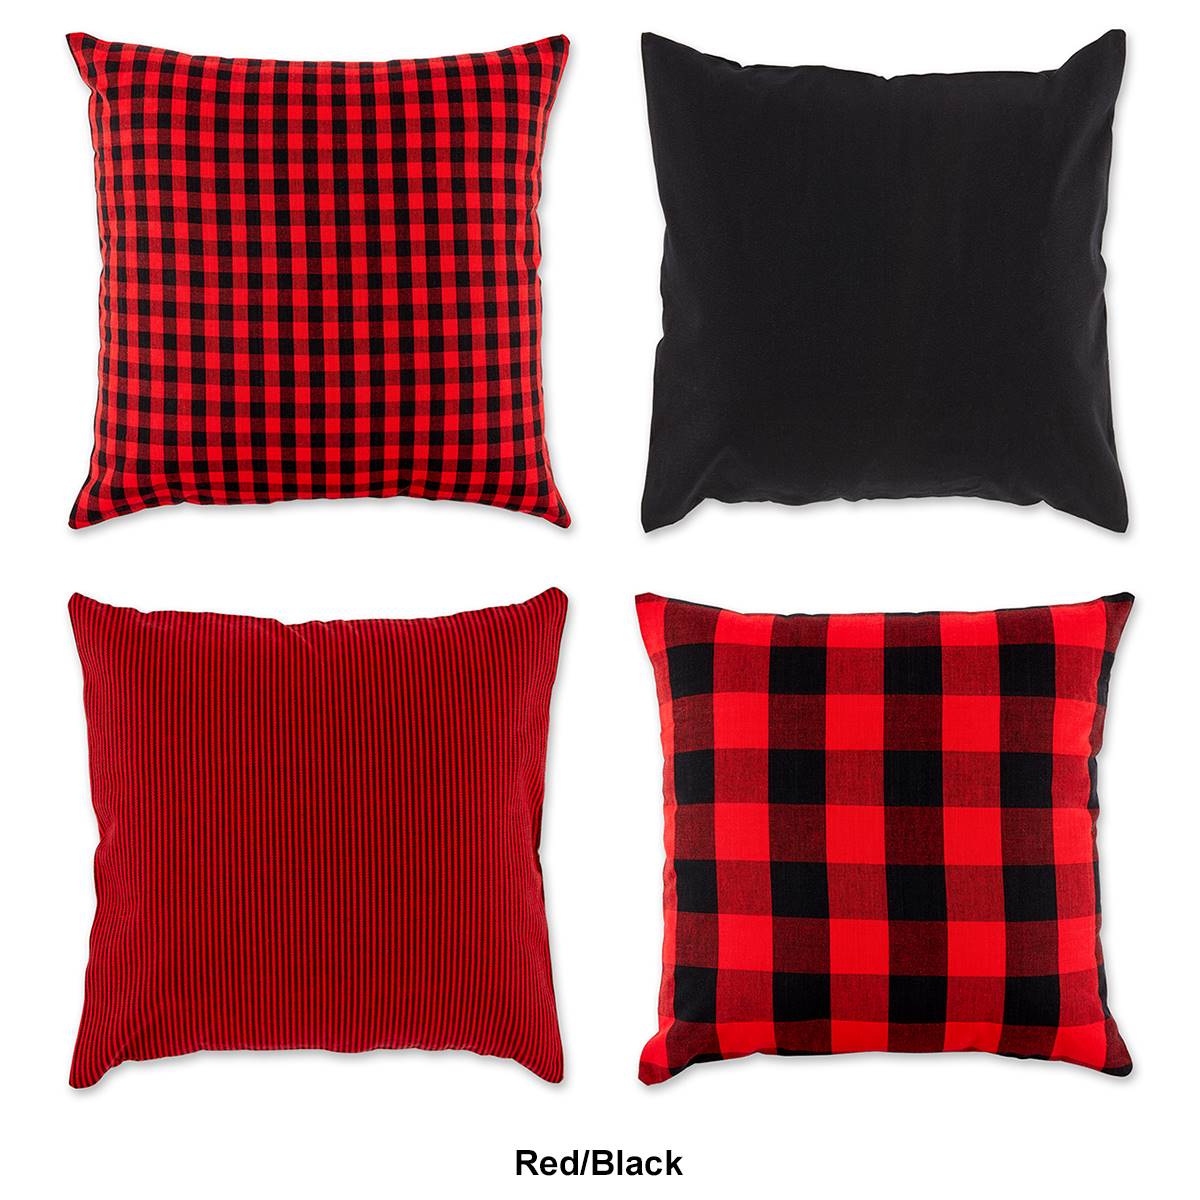 DII(R) Assorted Pillow Covers Set Of 4 - 18x18